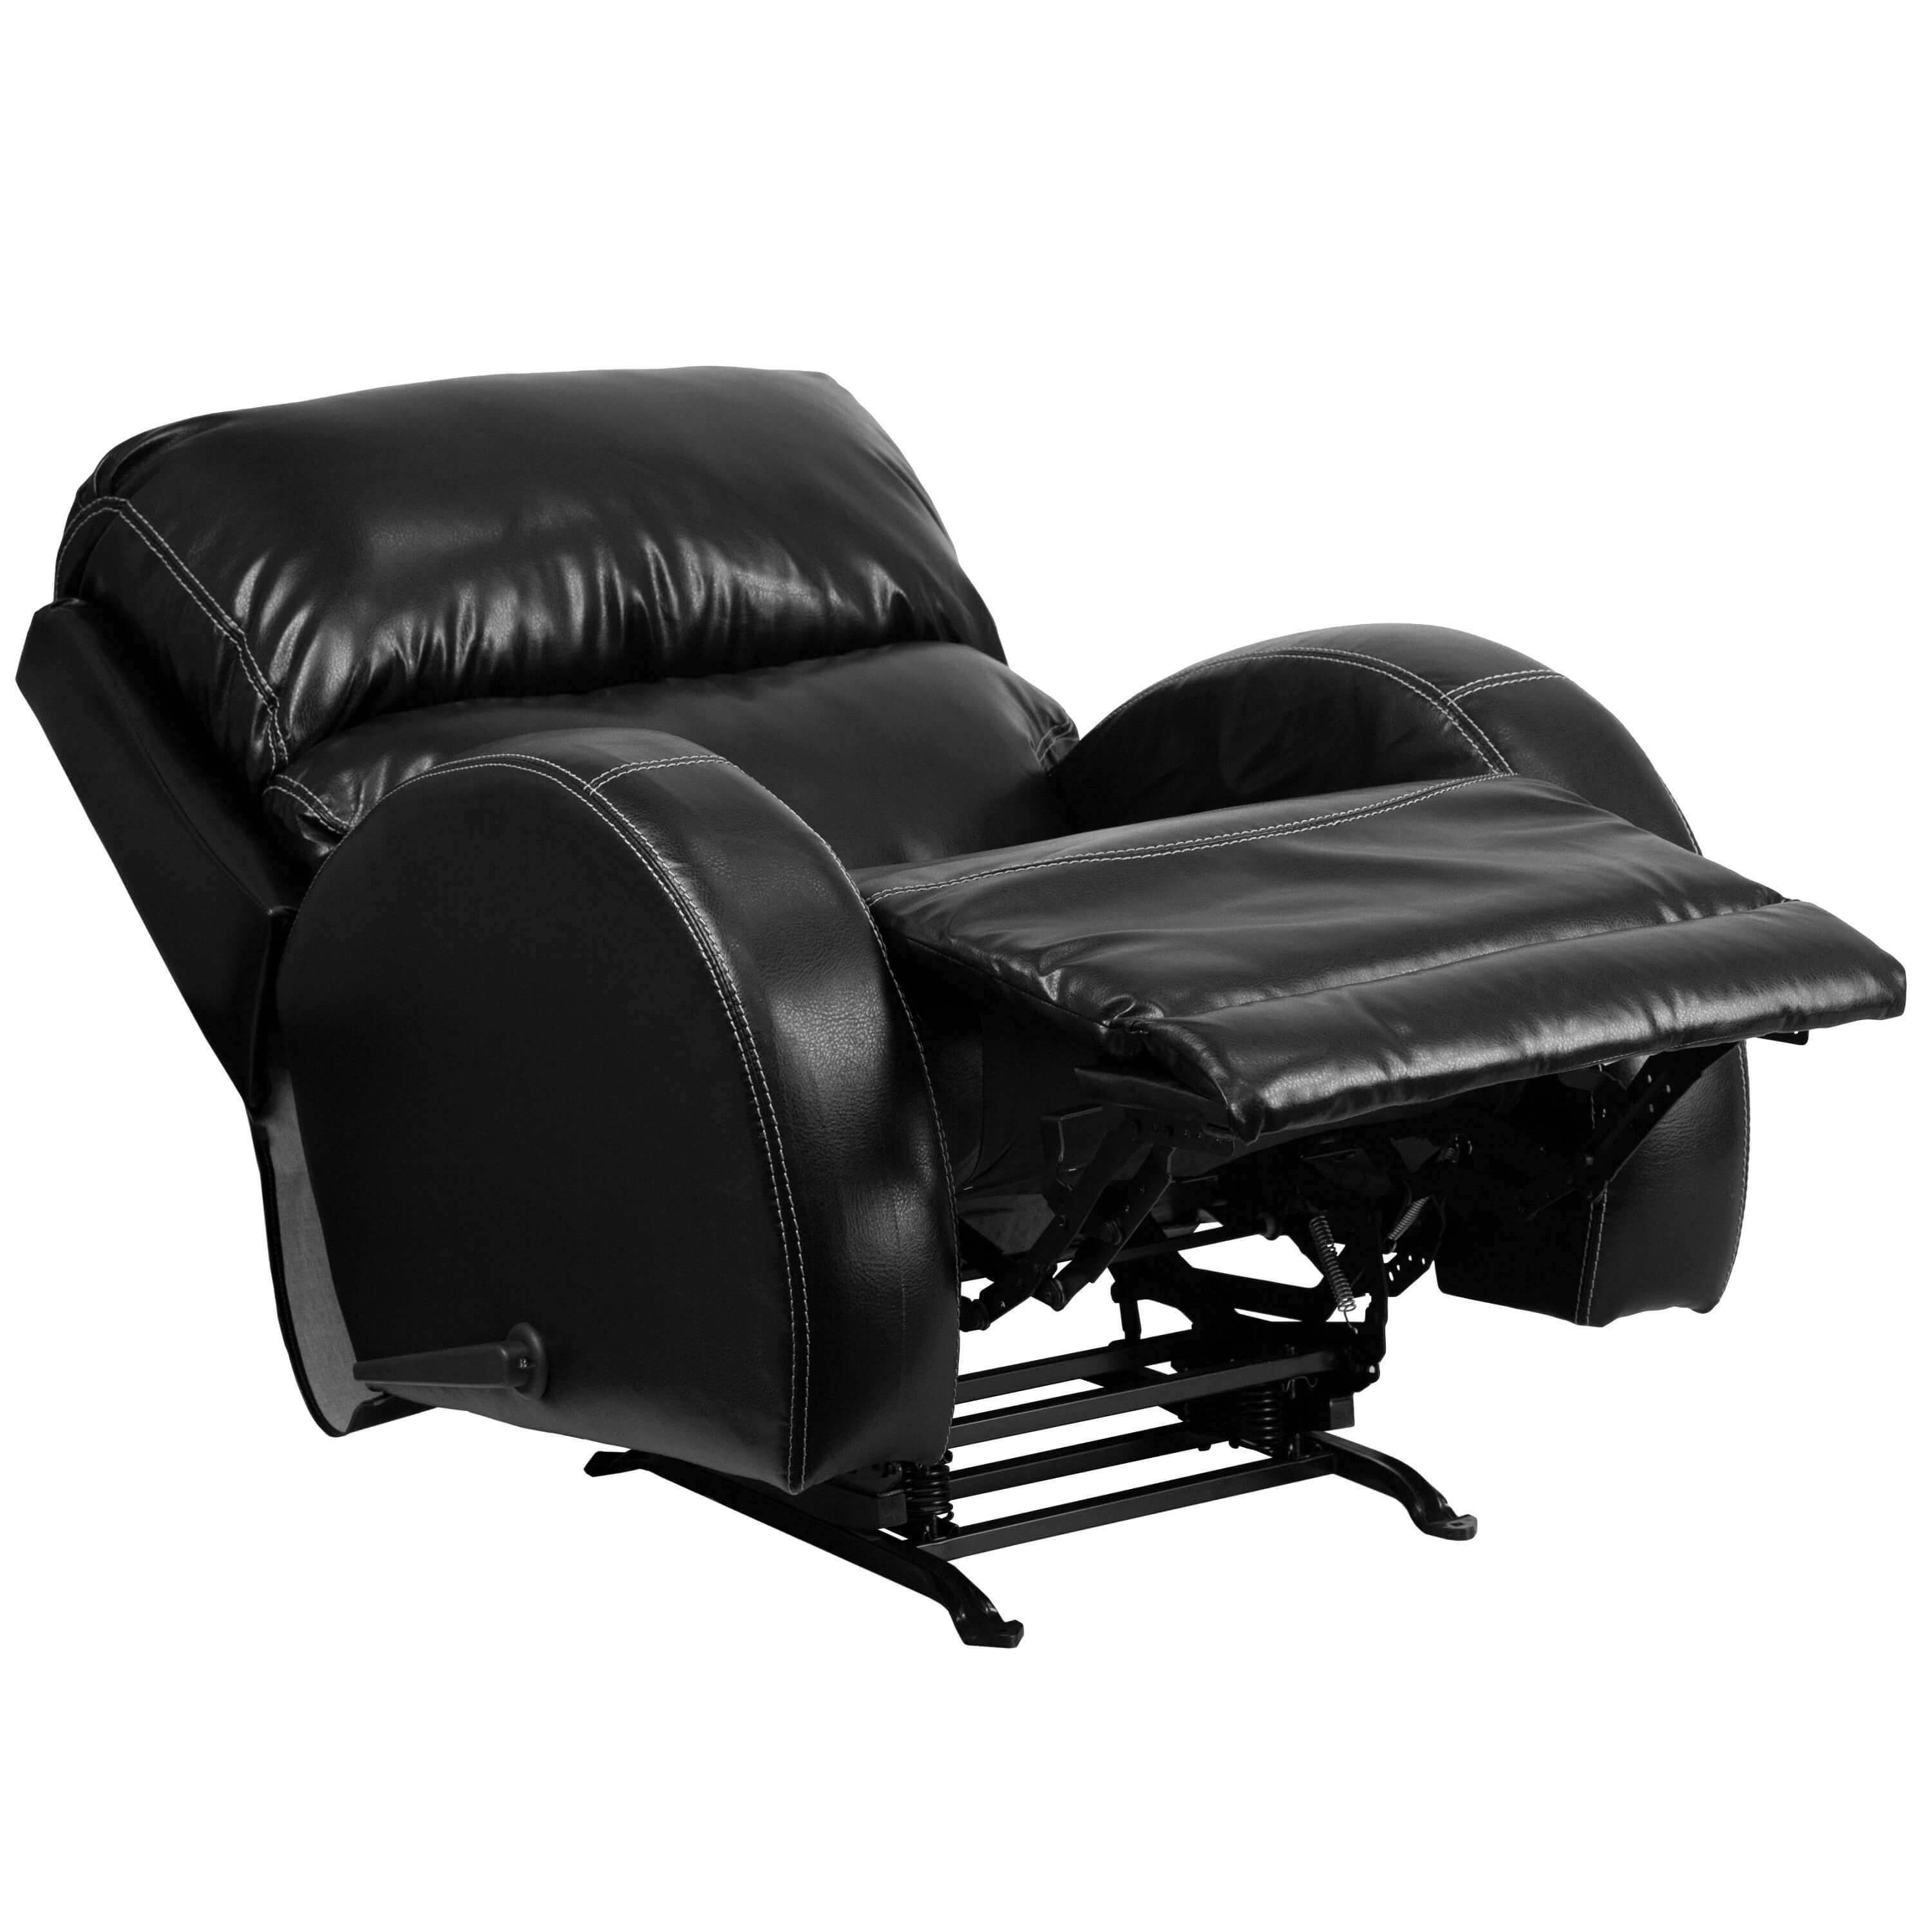 Leather rocking recliner reclined view